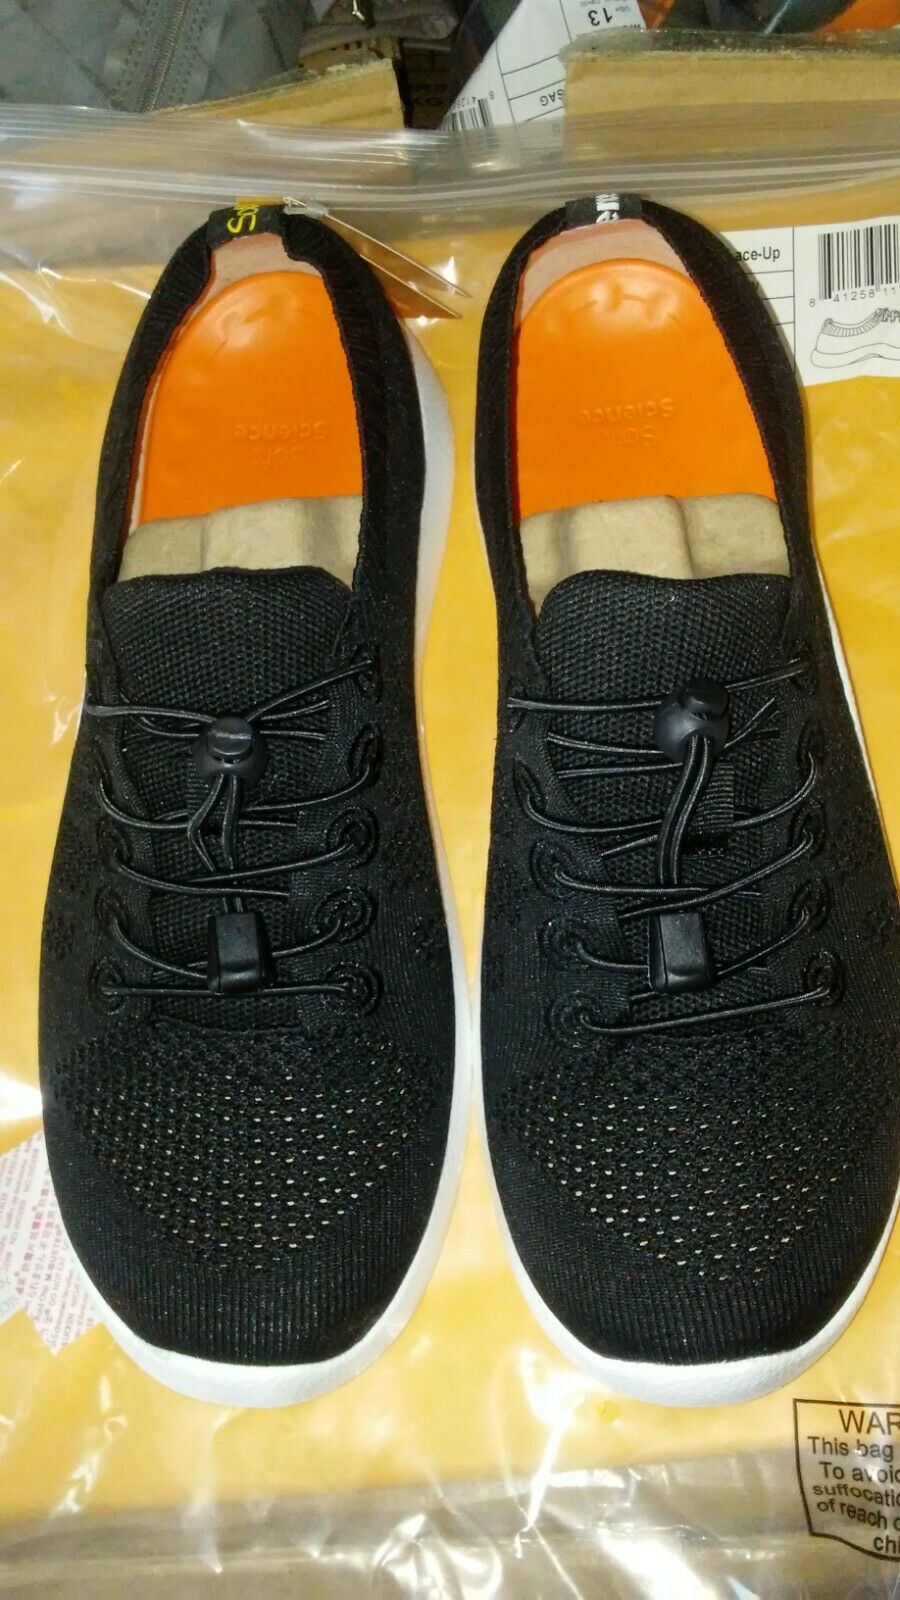 Men's Soft Science Shoes The Tradewind Slip On Athleisure Shoes Black Size 10M